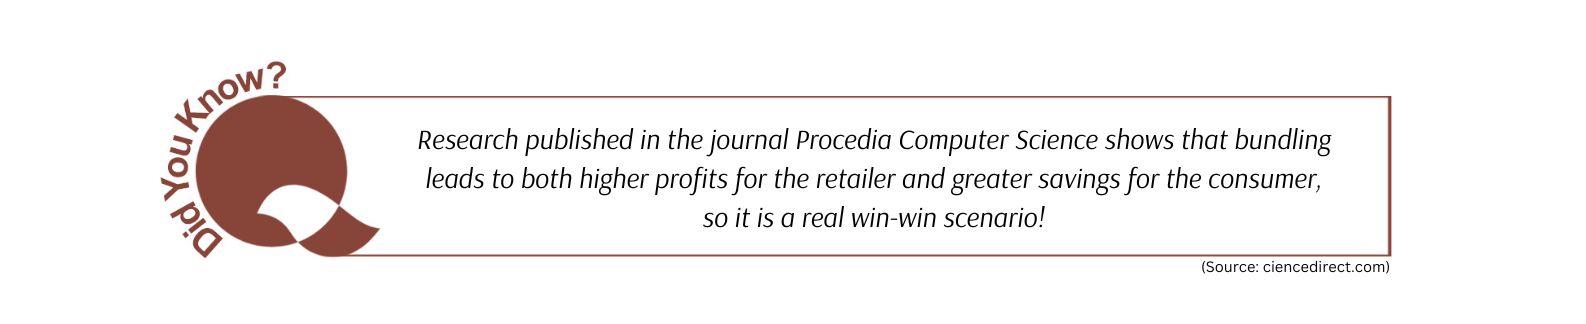 Research published in the journal Procedia Computer Science shows that bundling leads to both higher profits for the retailer and greater savings for the consumer, so it is a real win-win scenario!